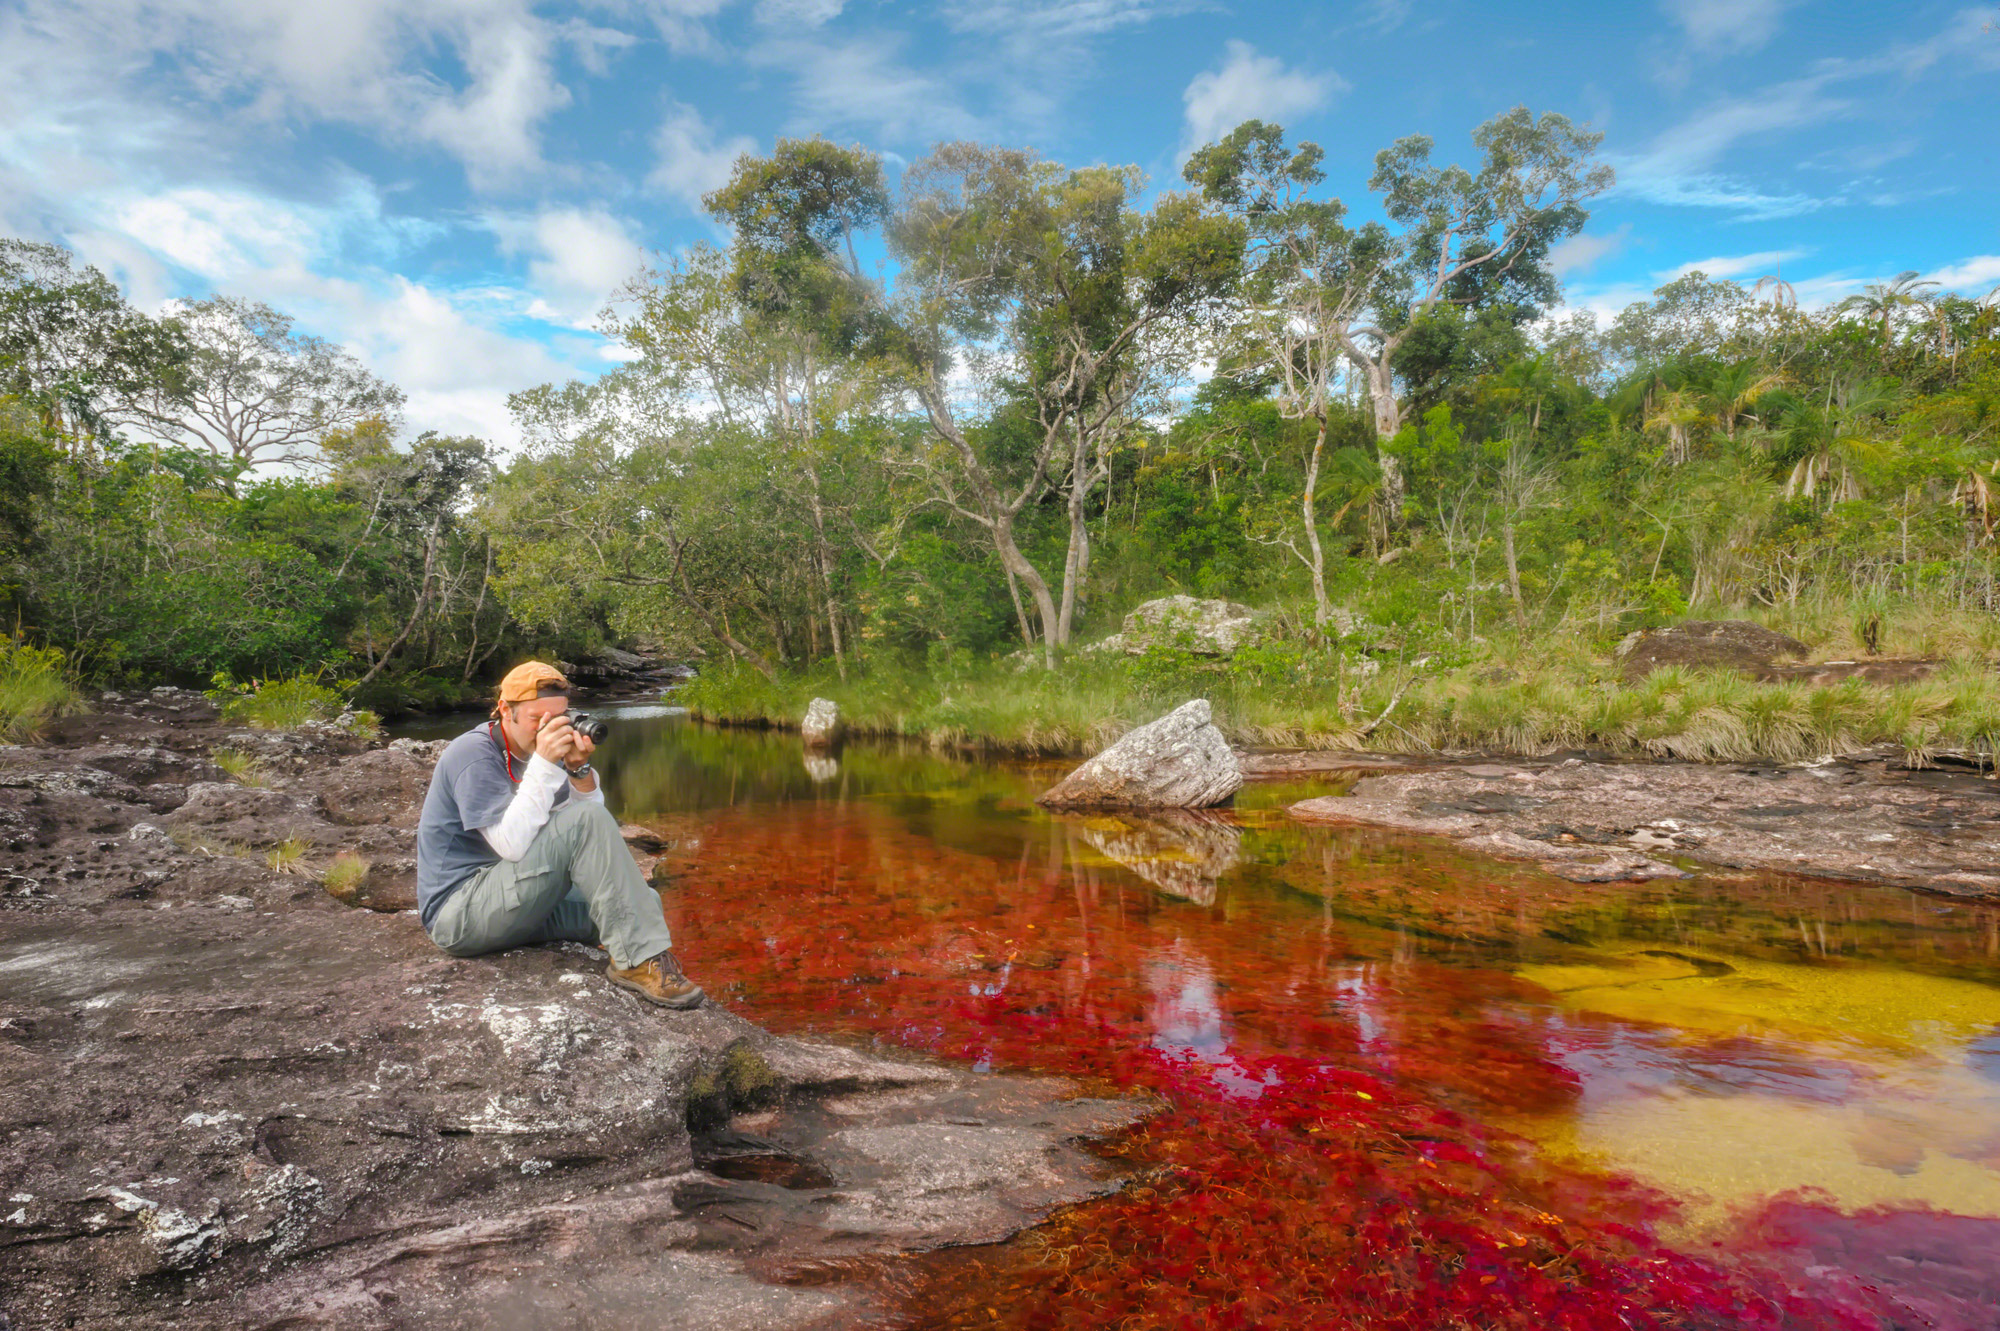 HQ Caño Cristales Wallpapers | File 982.02Kb